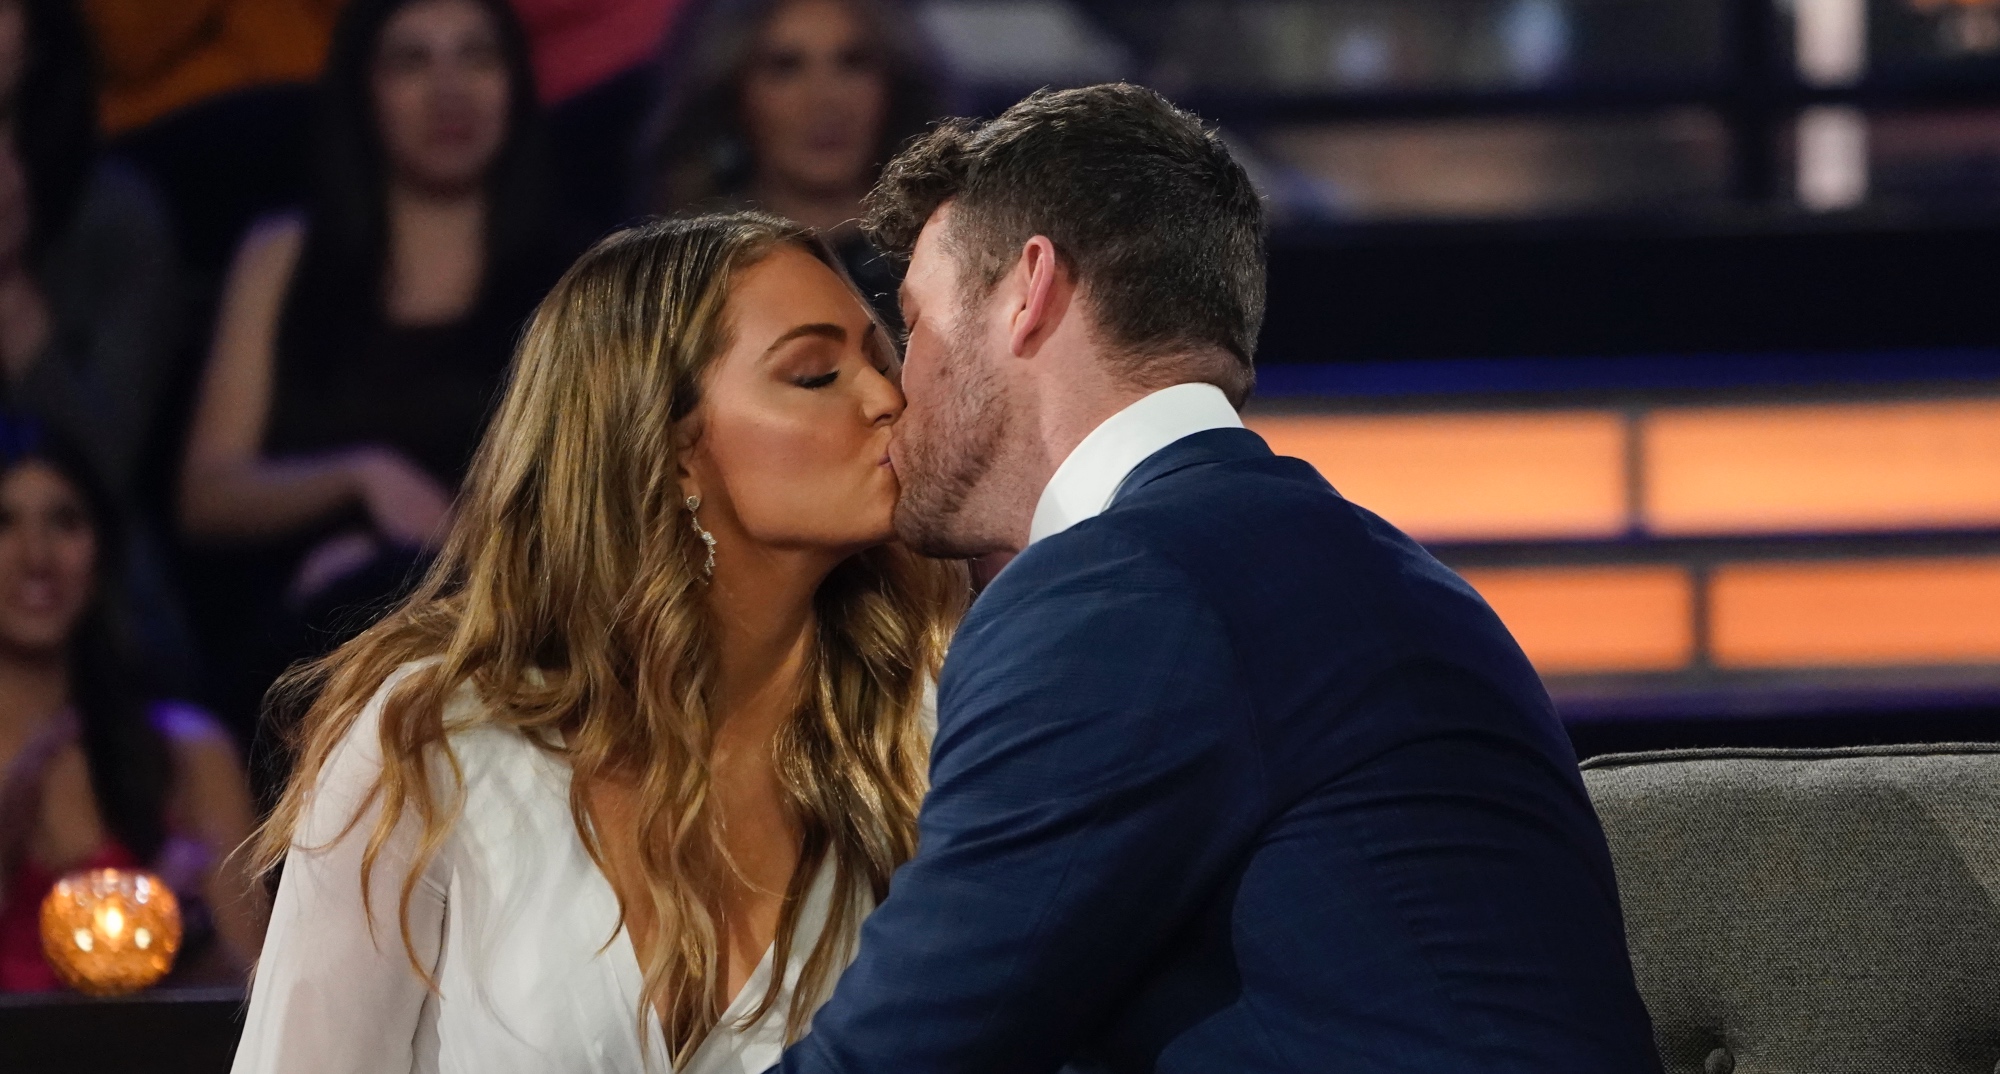 Susie Evans and Clayton Echard for 'The Bachelor' wearing white dress and blue suit kissing.